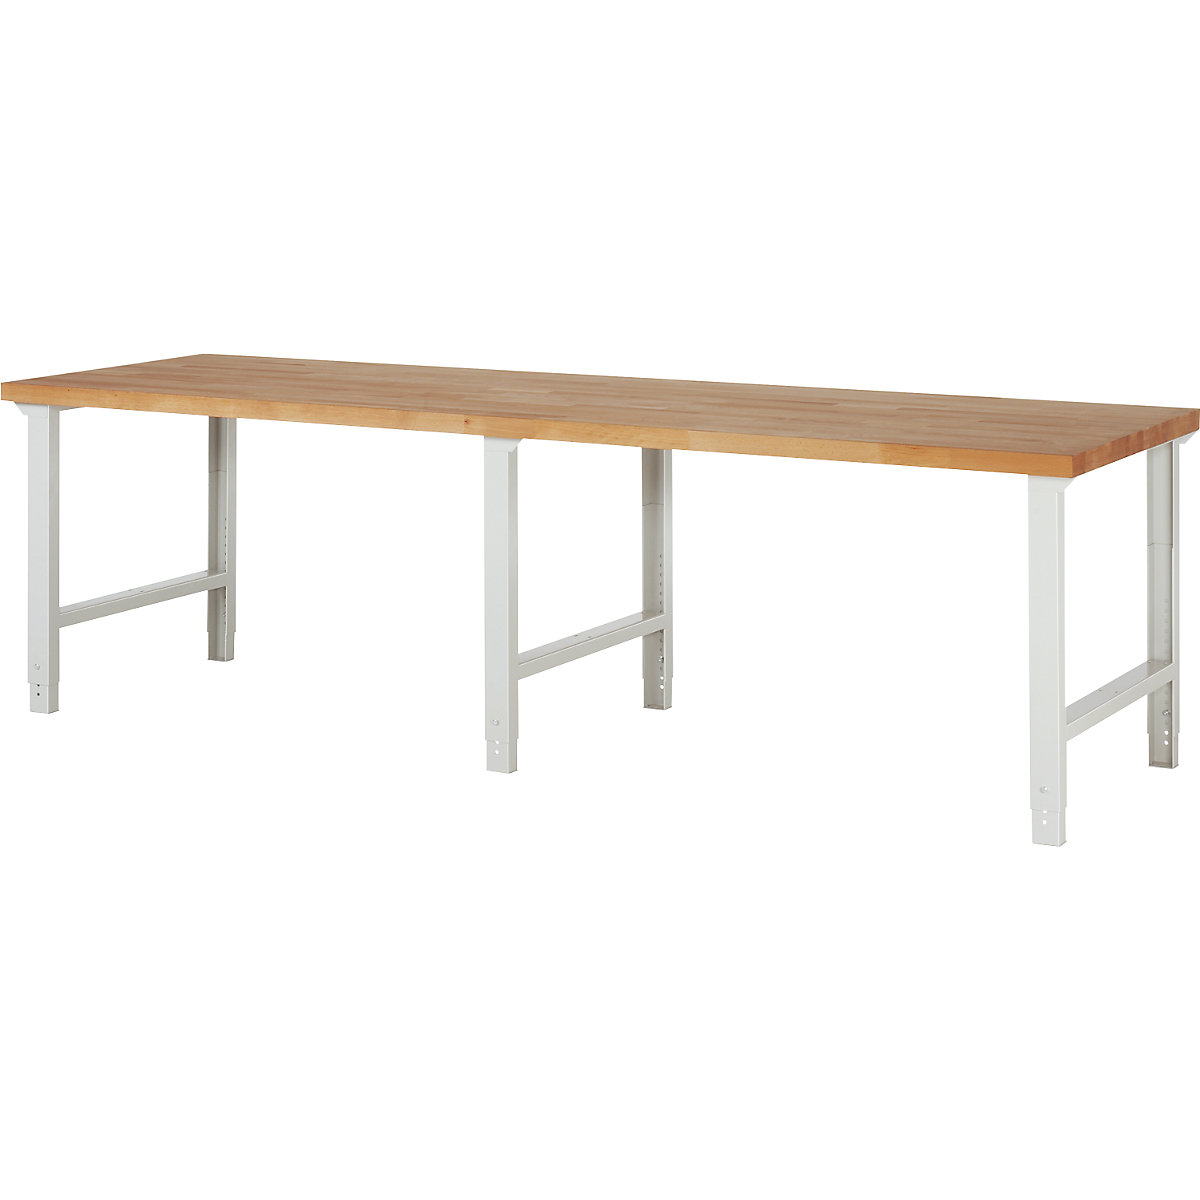 Workbench, Series 7 modular system – eurokraft pro, without substructure, extra wide, WxD 3000 x 900 mm-4